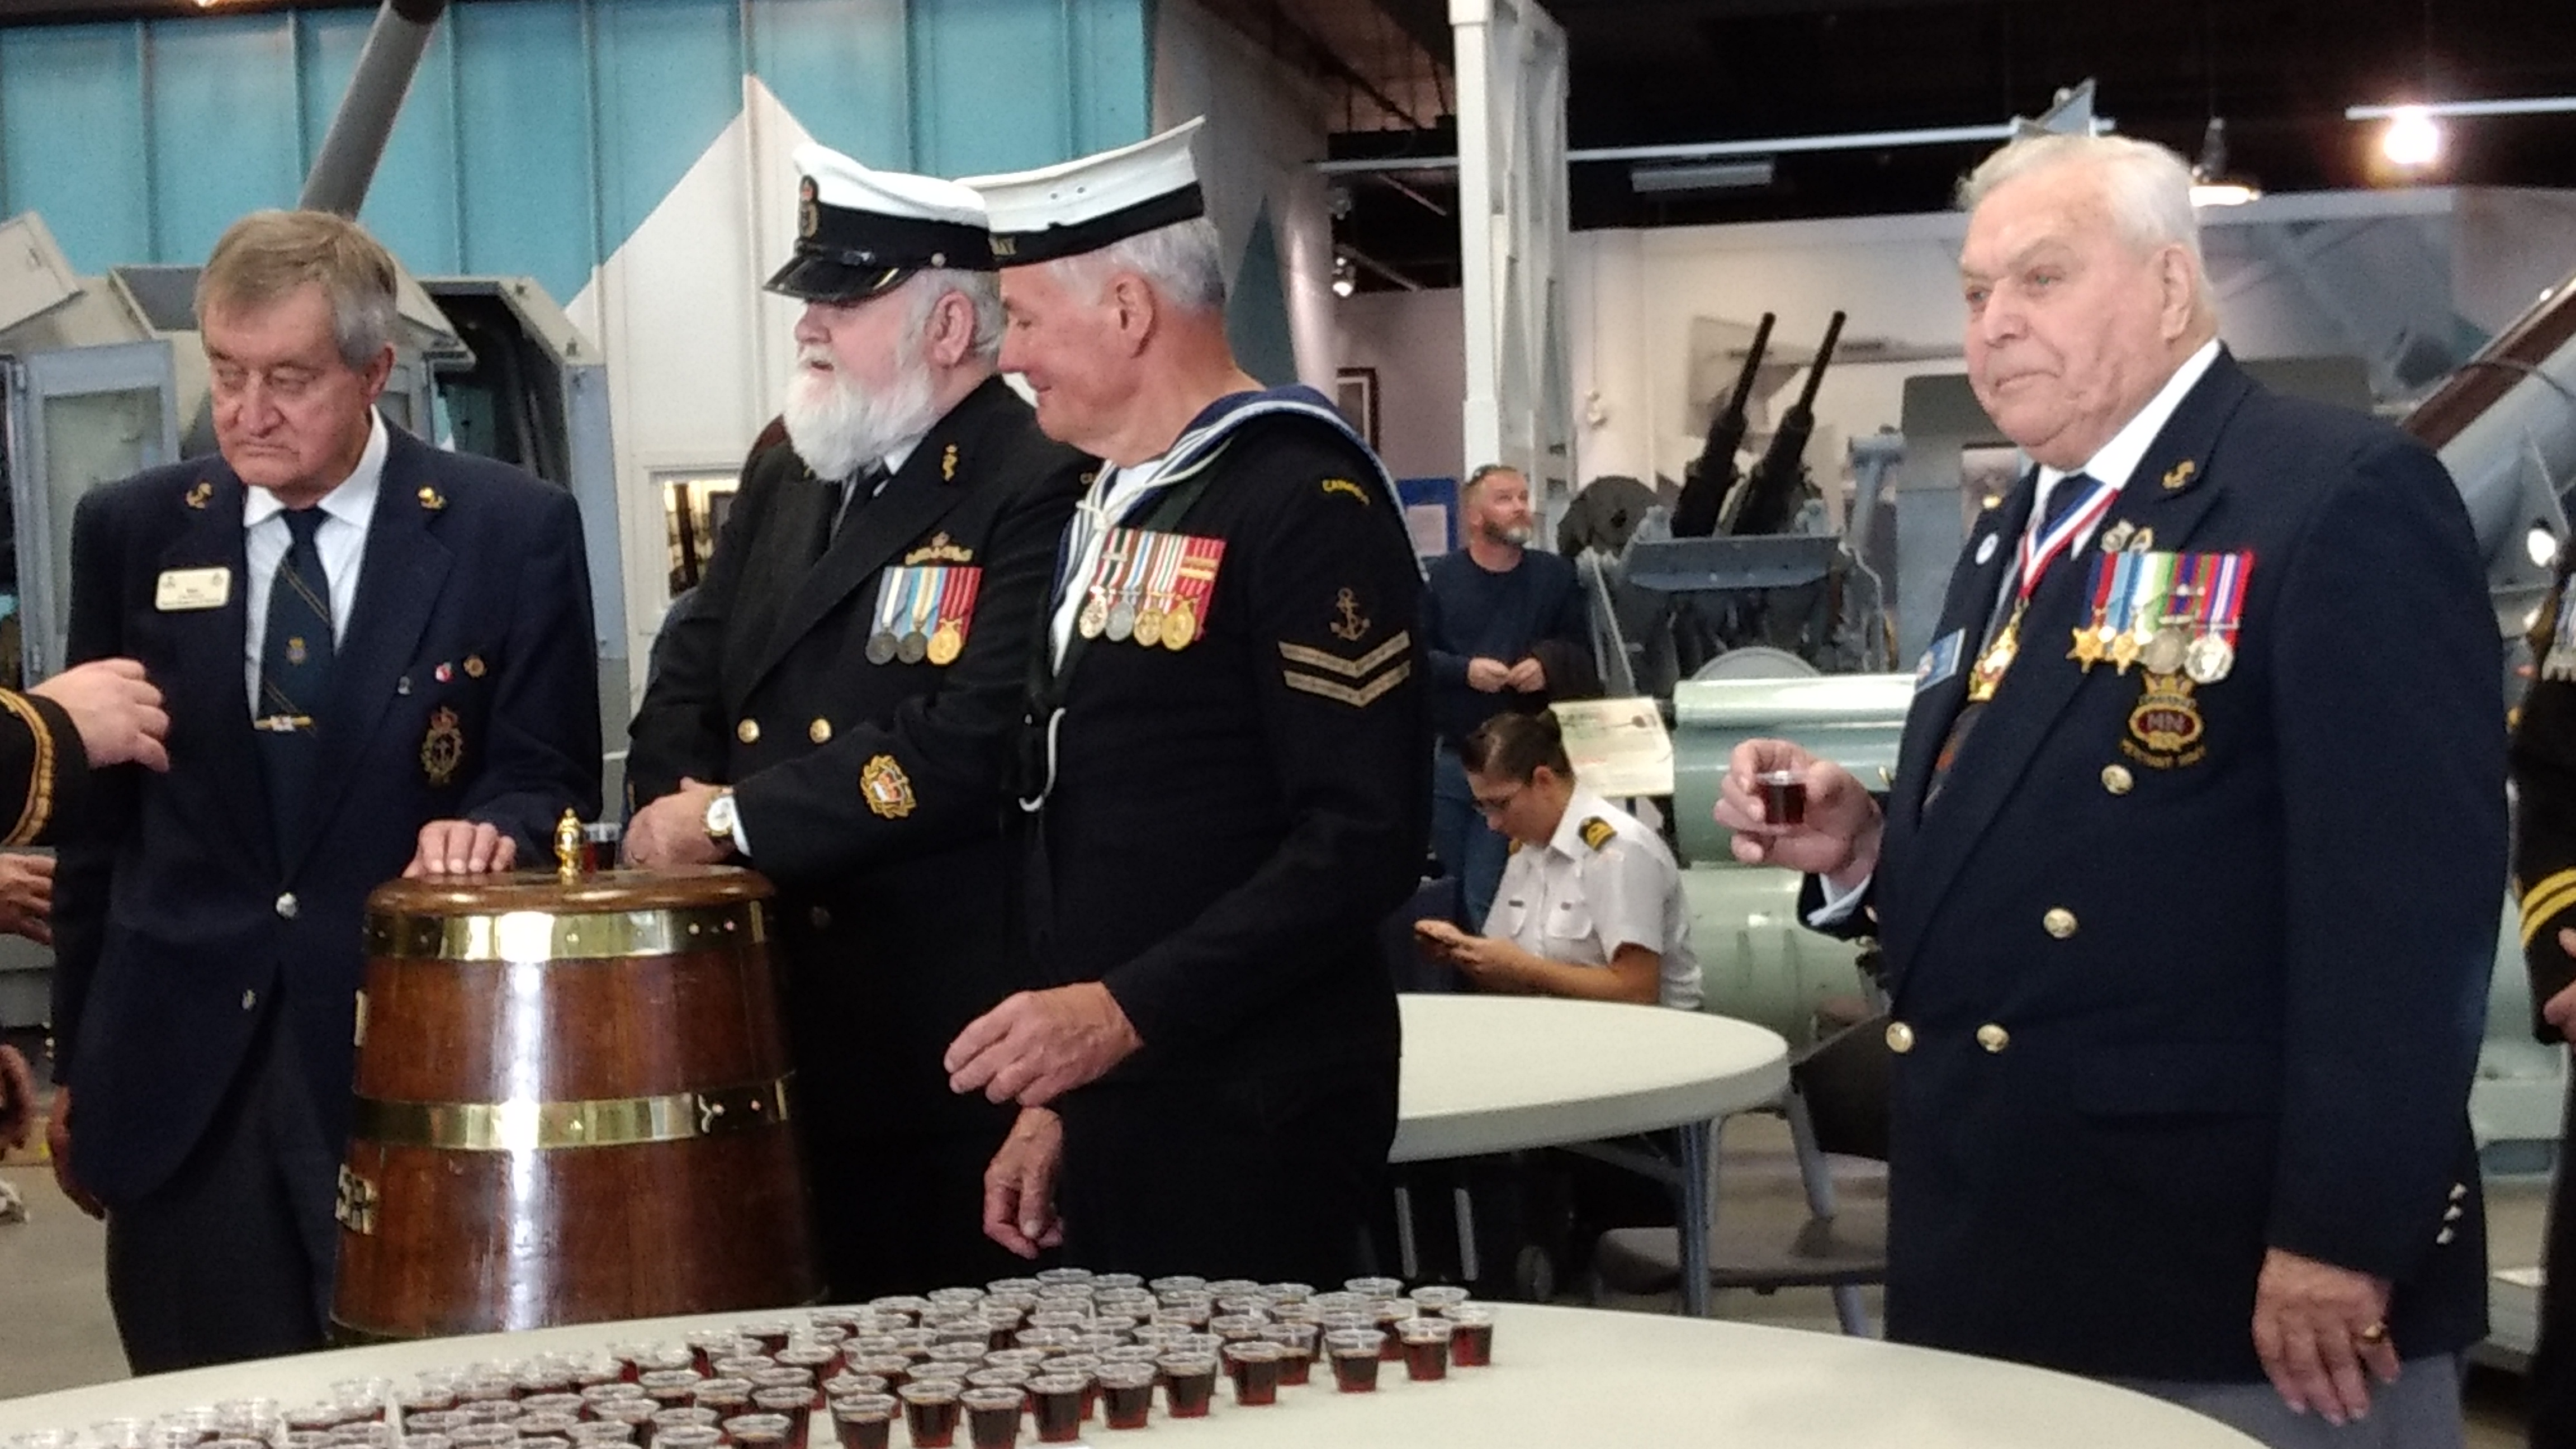 Veterans, including Petty Officer Lorne Baird, centre, get ready to splice the mainbrace and toast the Royal Canadian Navy. Sunday, October 23, 2016